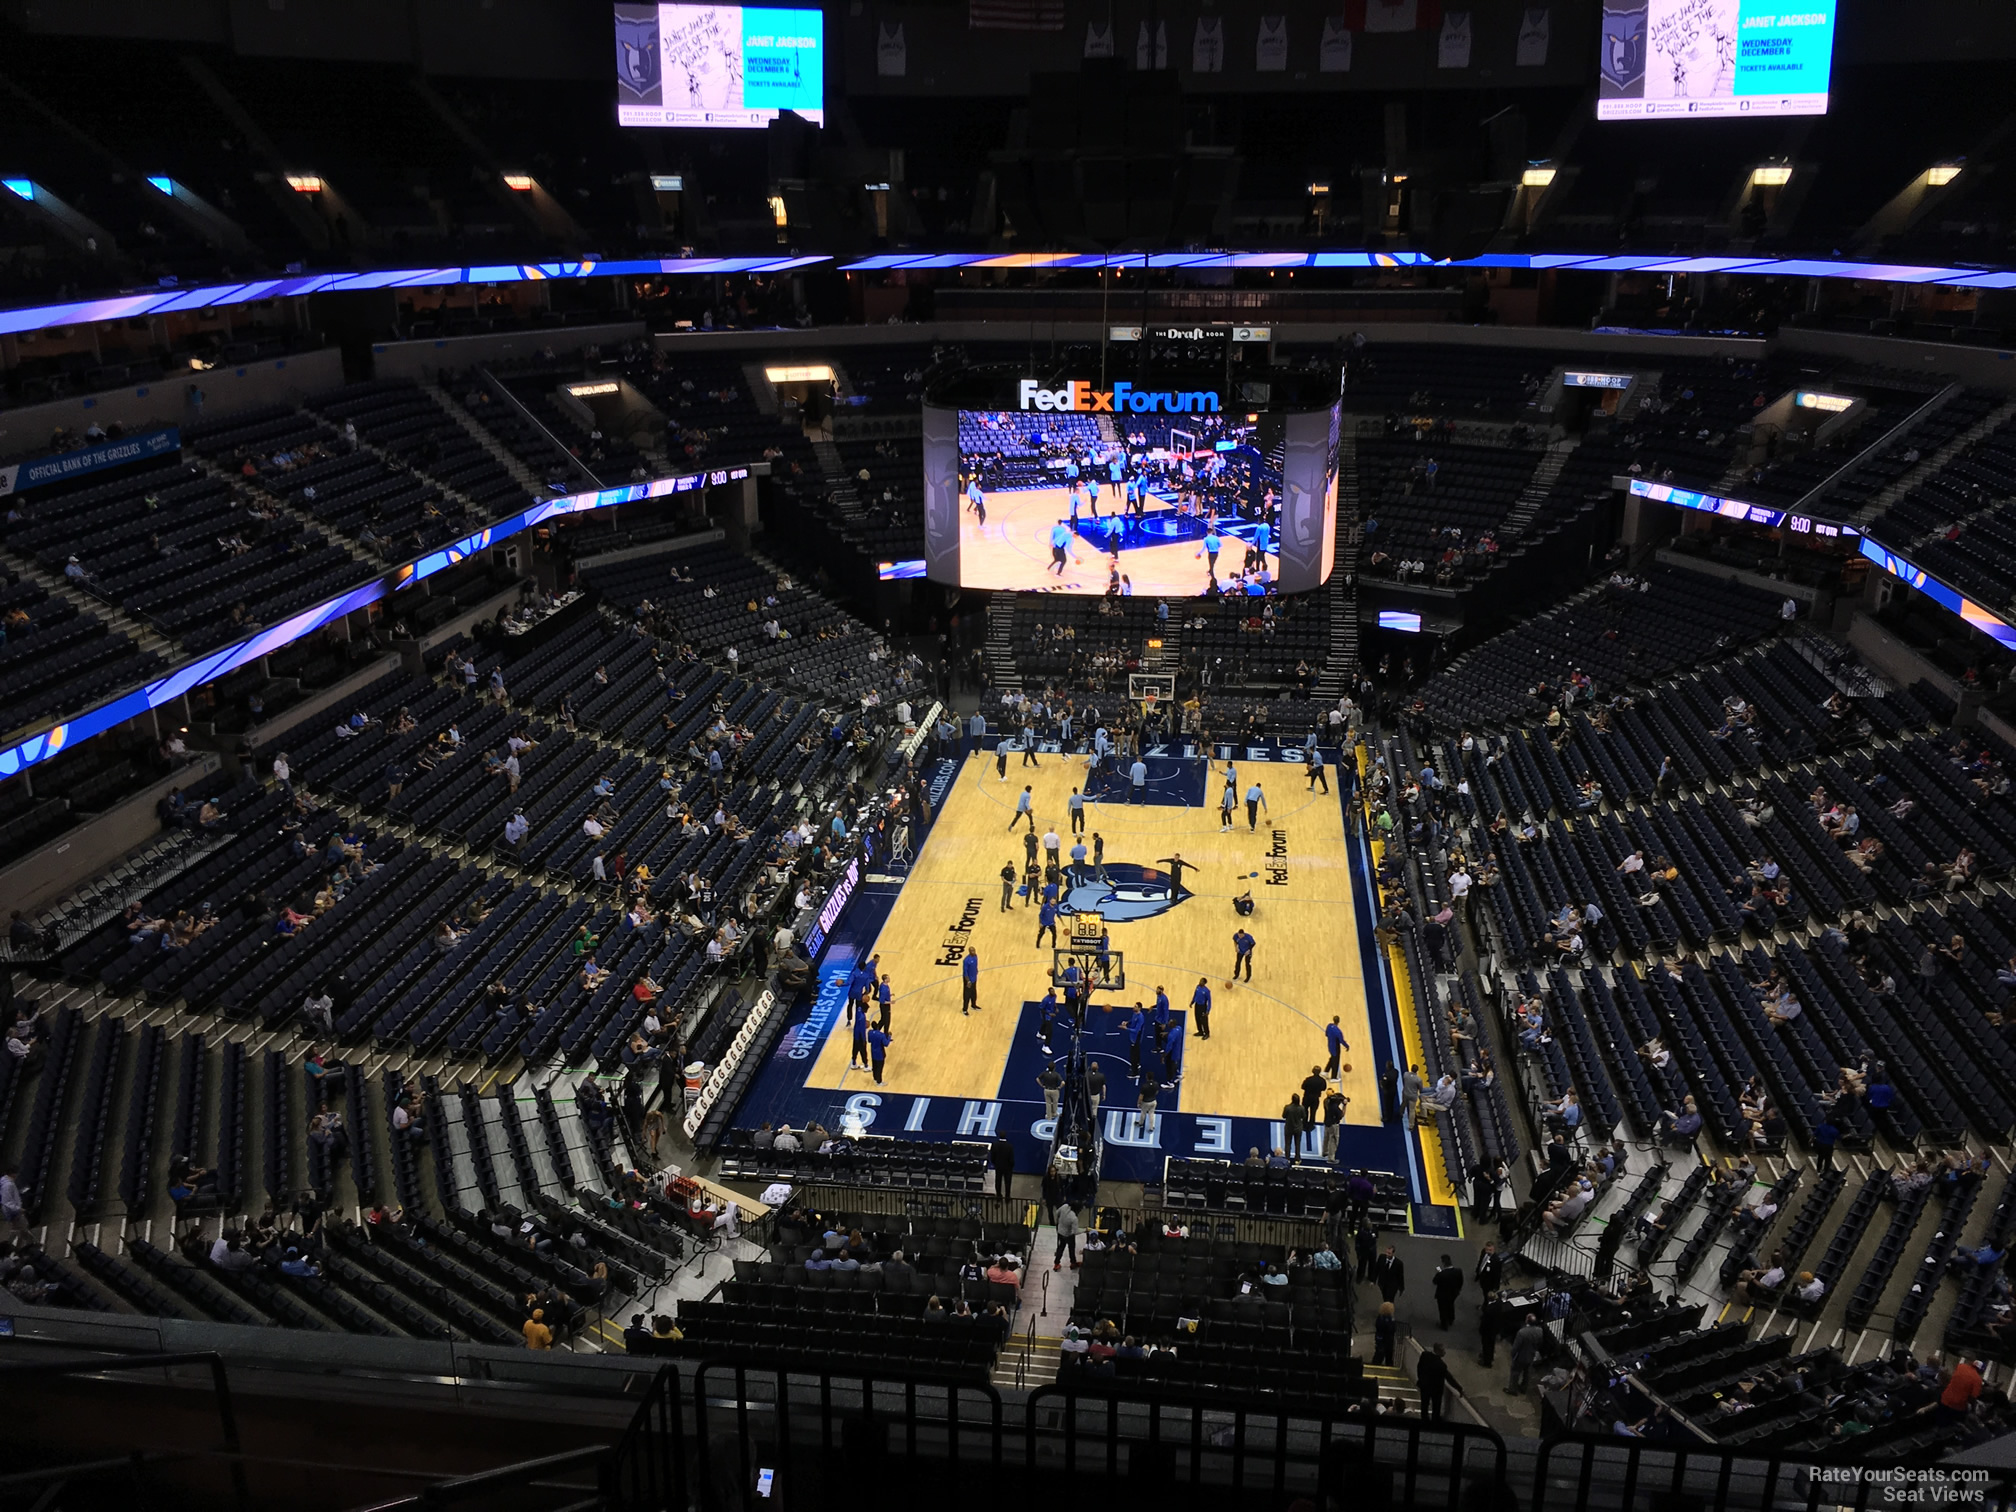 Share 155+ imagen fedexforum seating chart with seat numbers - In ...